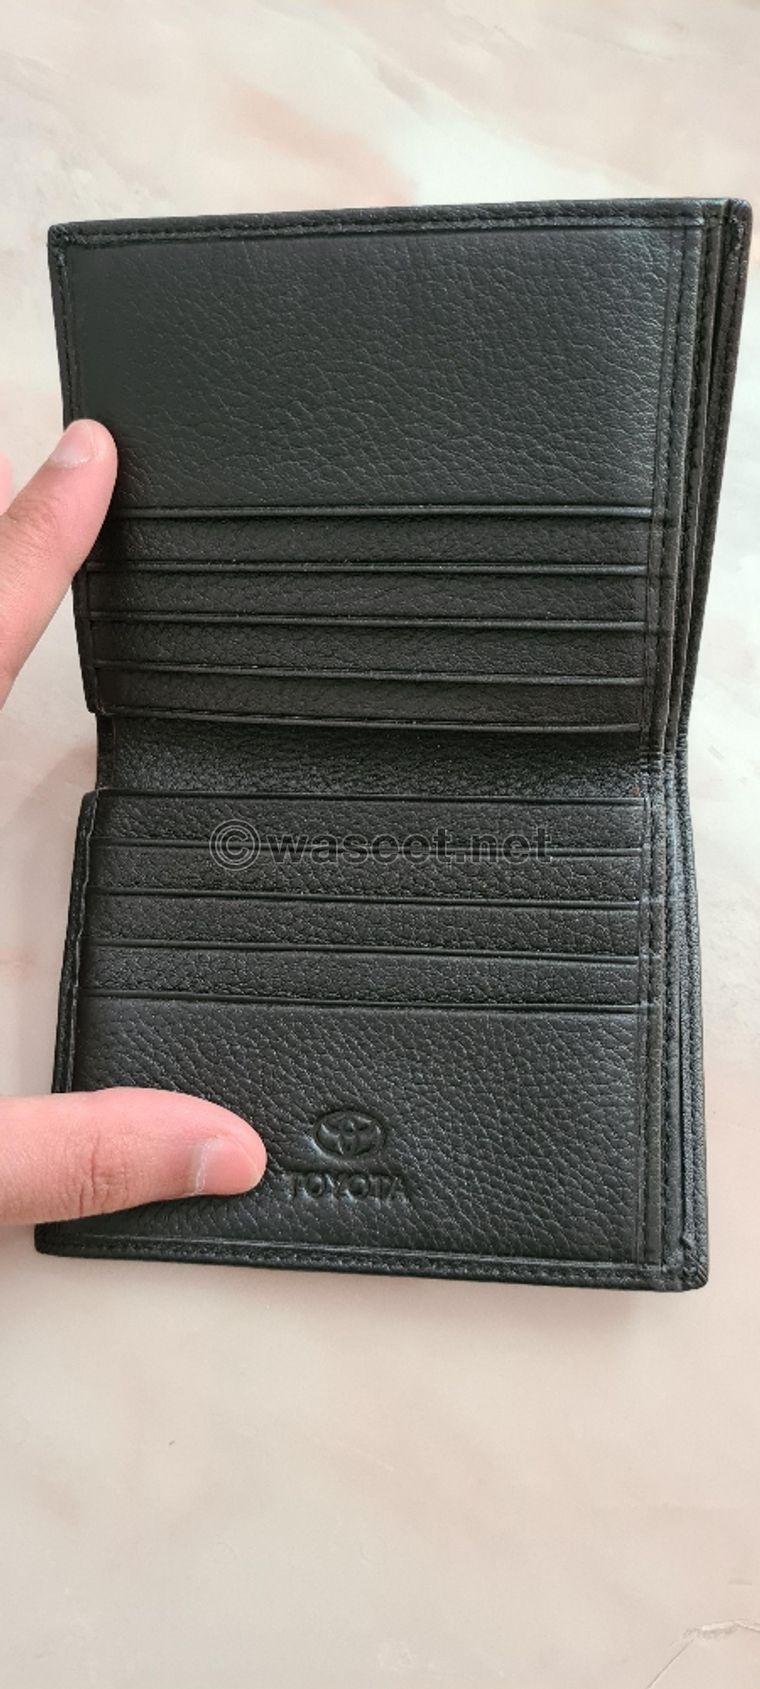 New leather Toyota wallet 1